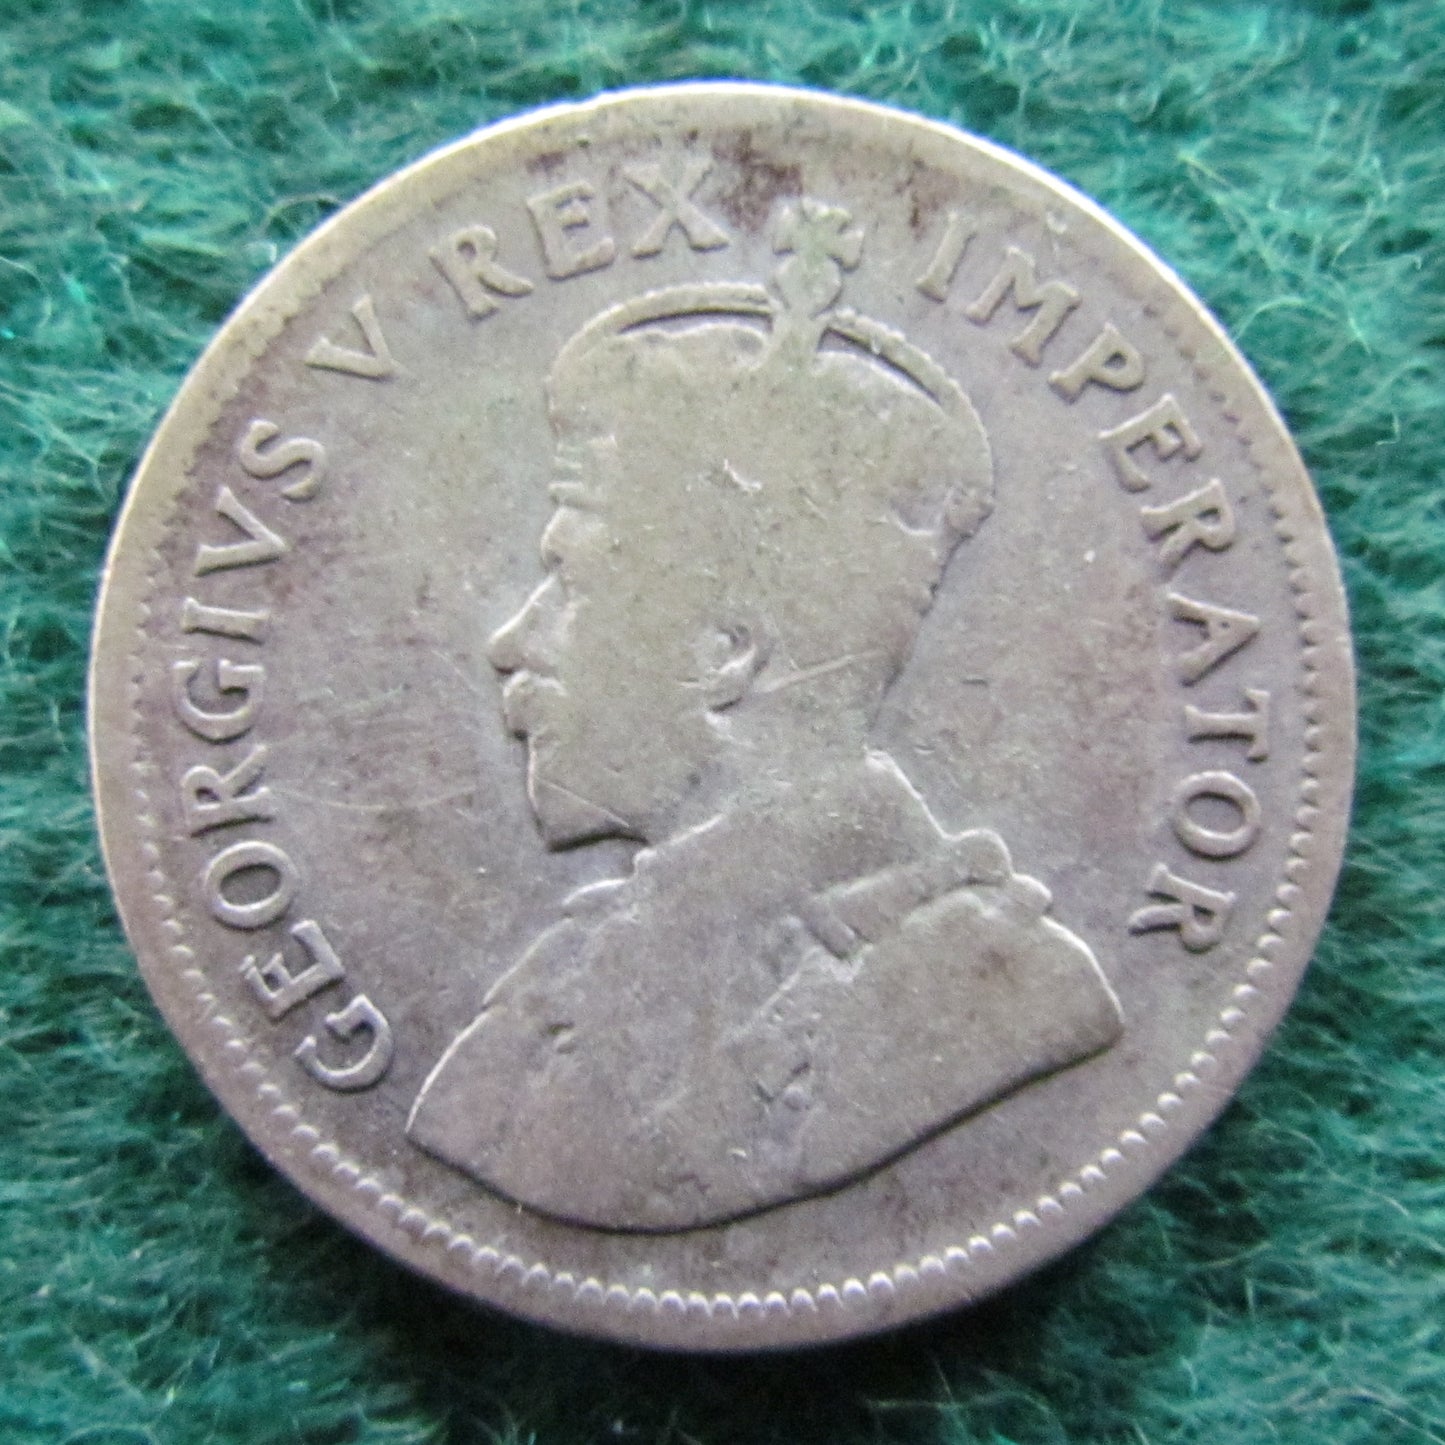 South Africa 1929 1 Shilling Coin